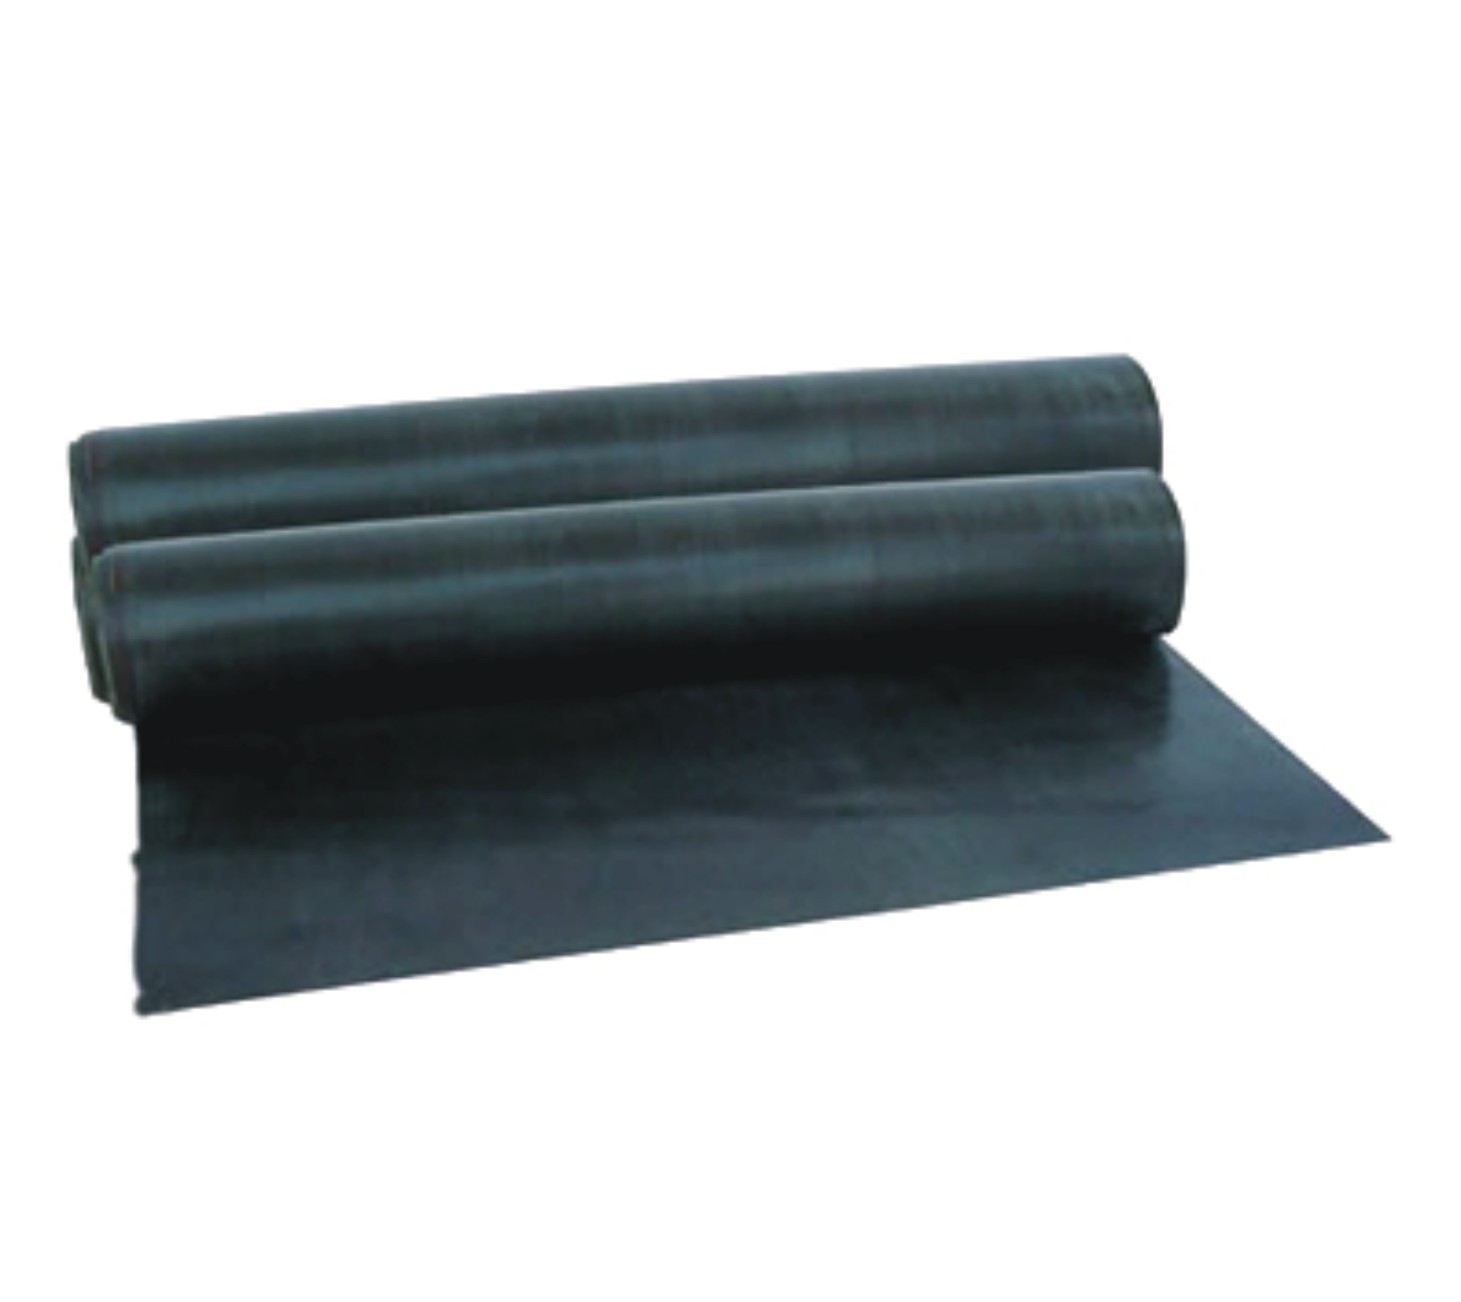 Radiation Protection lead rubber sheet